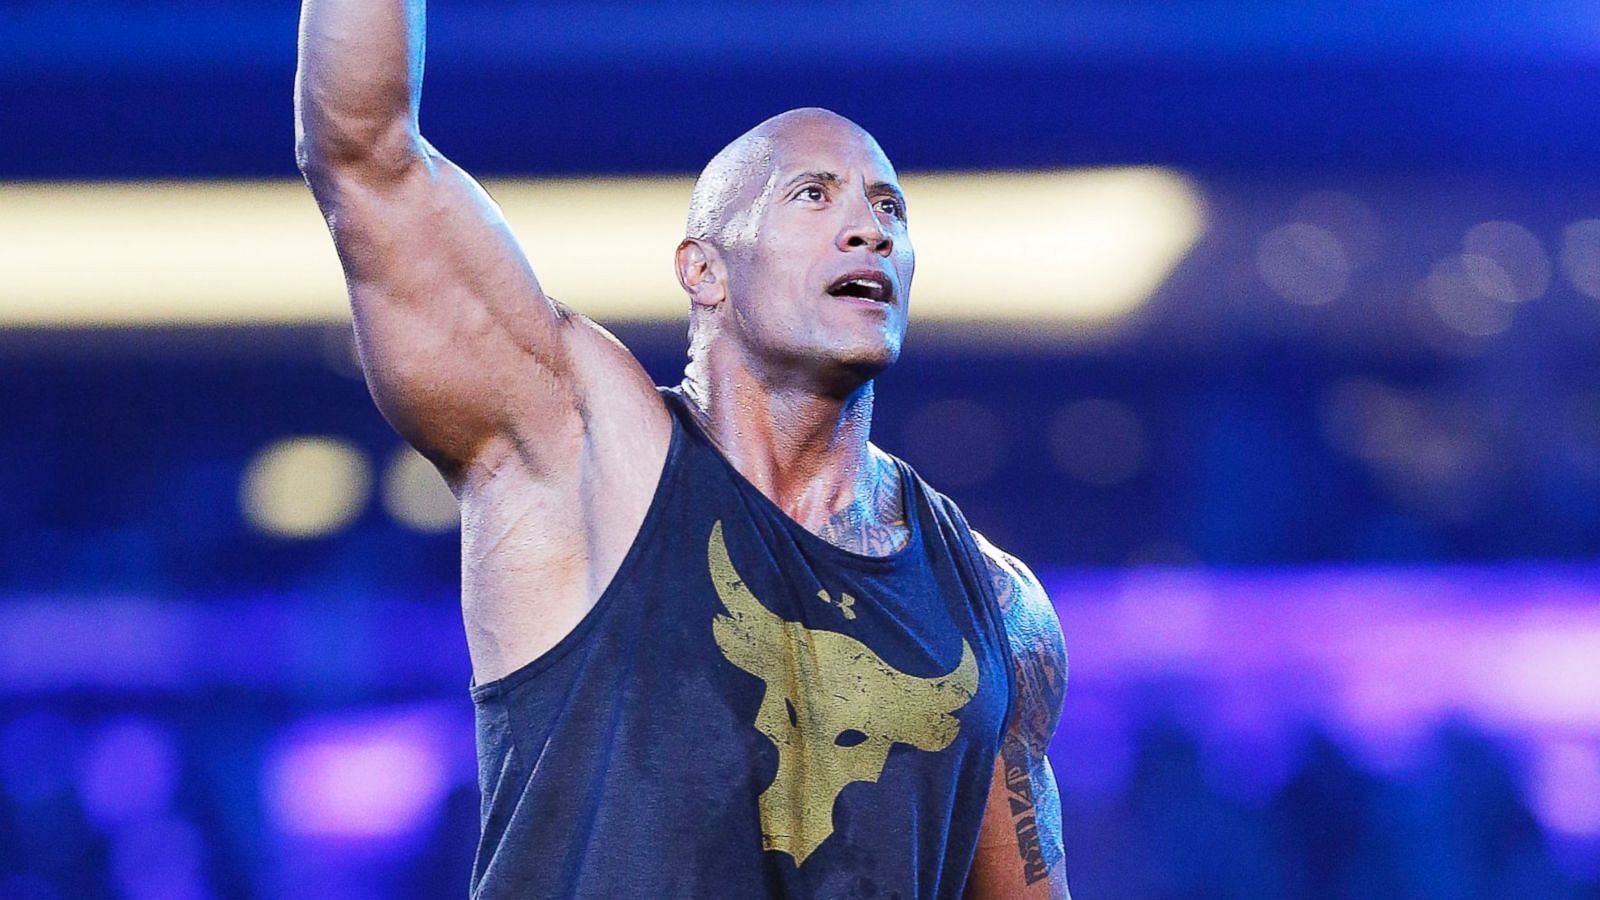 The Rock is one of the greatest WWE superstars to ever step into the ring